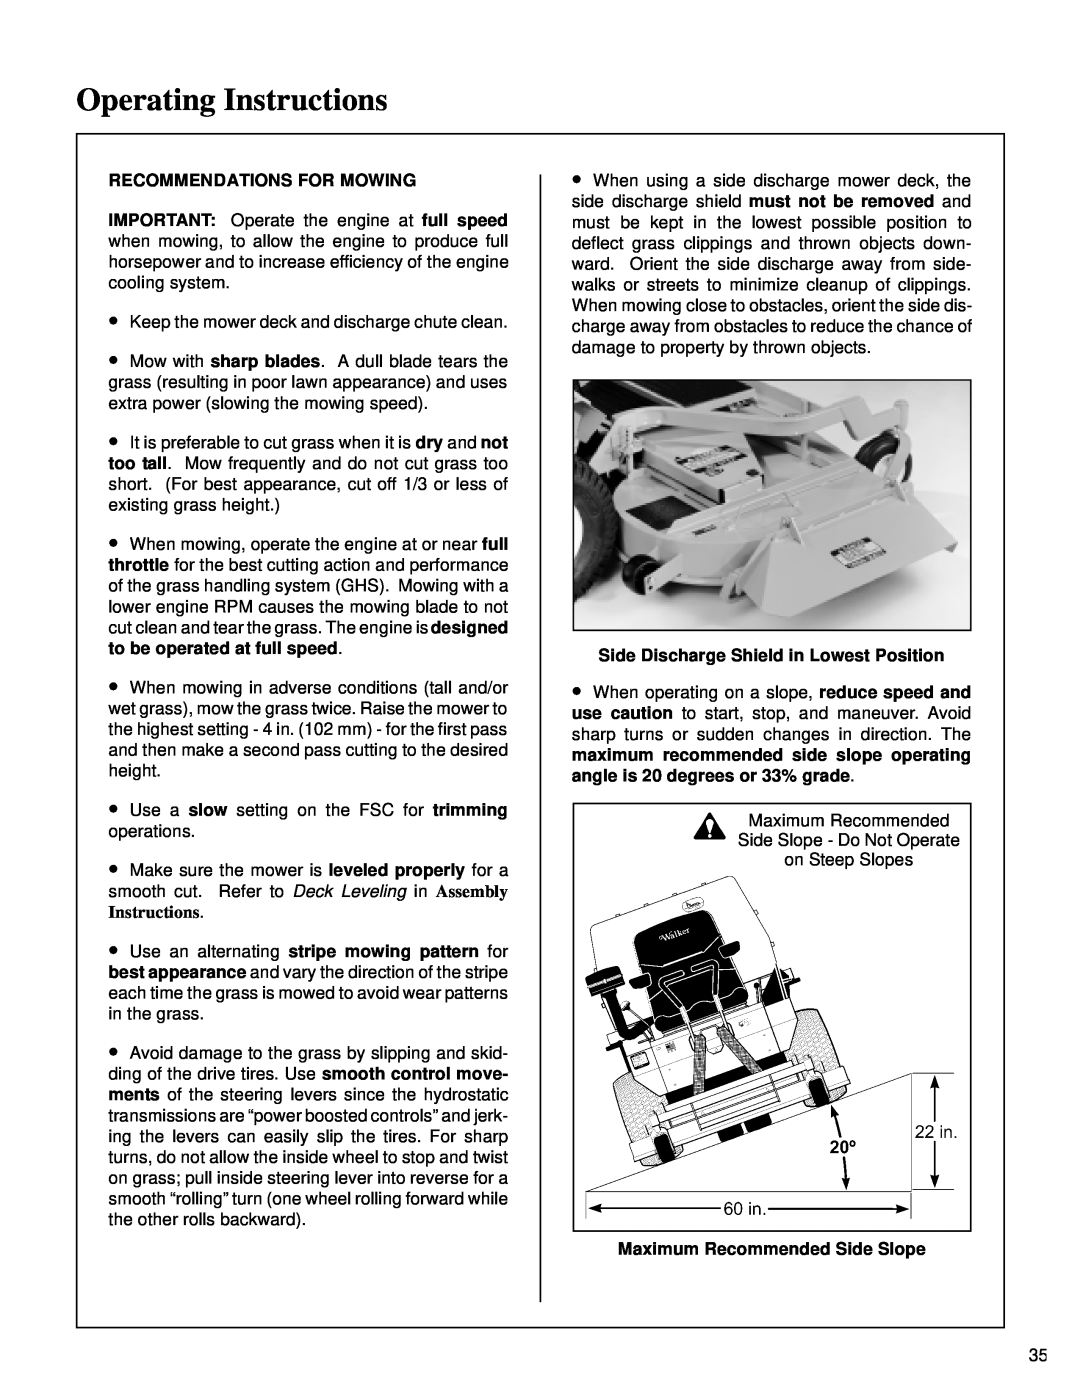 Walker MT owner manual Operating Instructions, Recommendations For Mowing, Side Discharge Shield in Lowest Position 